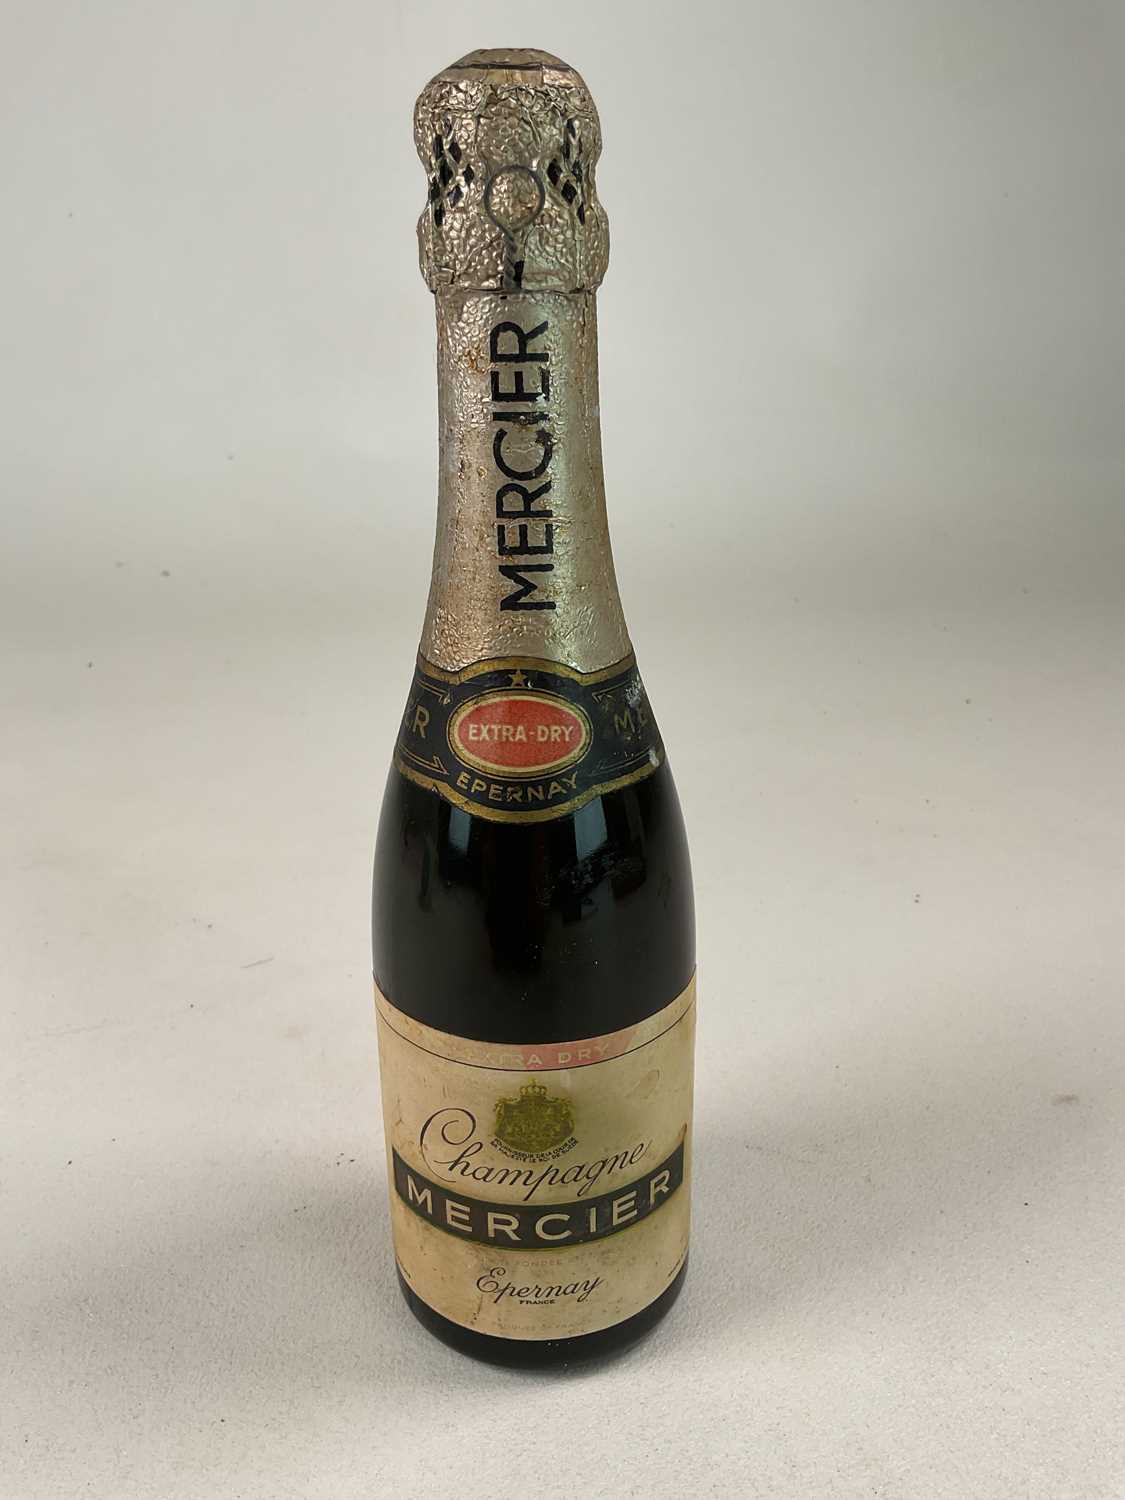 CHAMPAGNE; a half bottle of Mercier Champagne, extra dry.